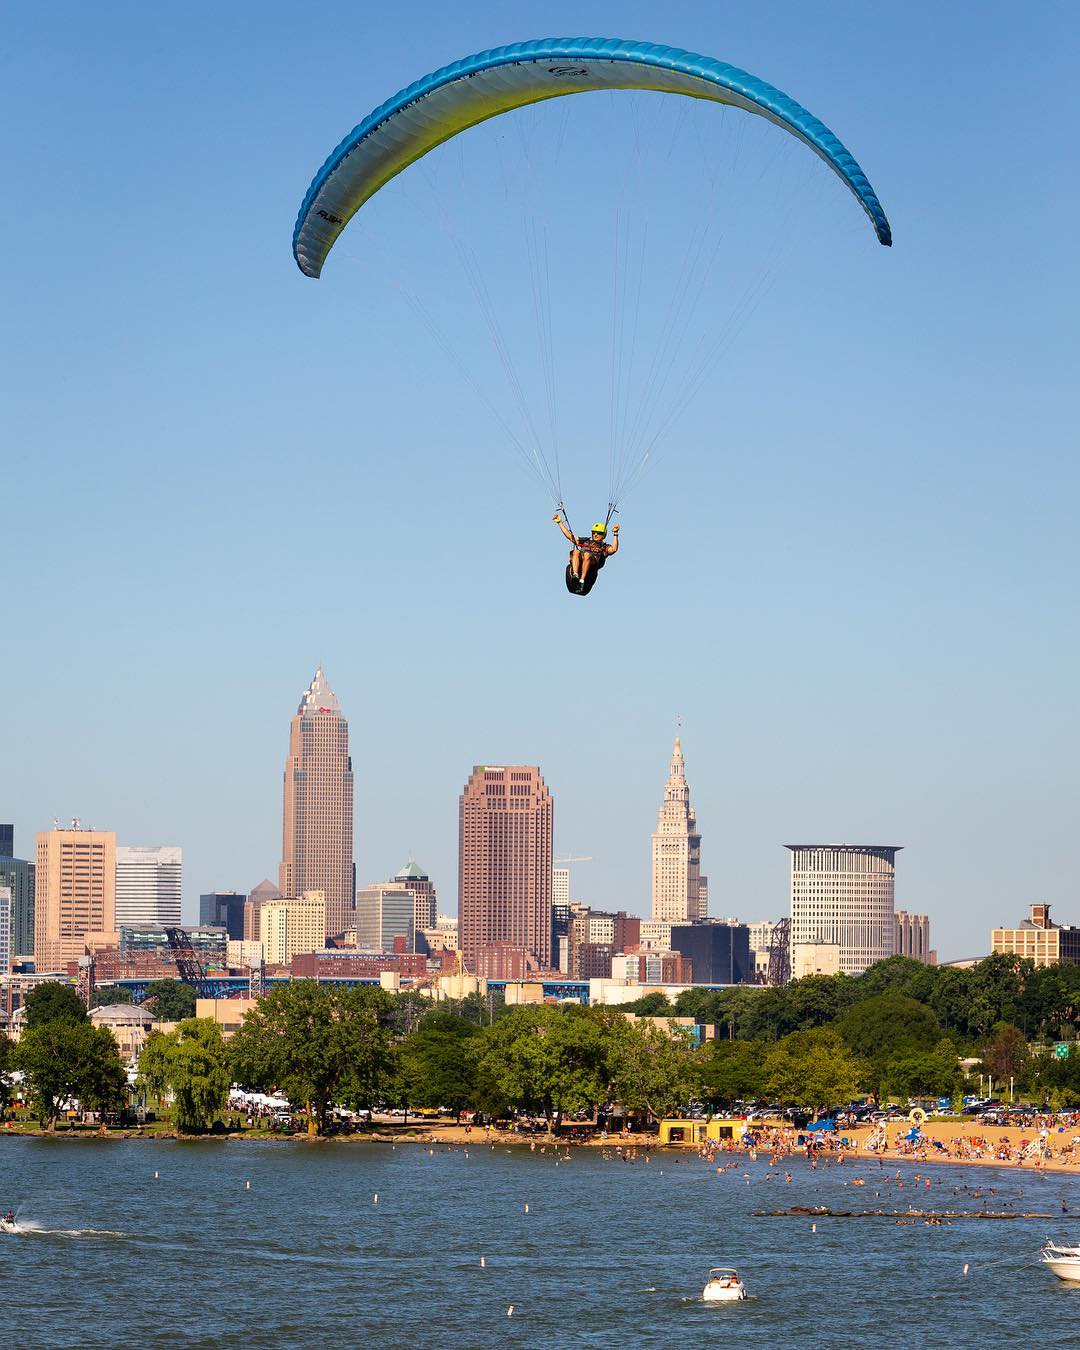 Person Paragliding Over the River at Edgewater State Park in Cleveland, OH. Photo by Instagram user @cyorkphoto